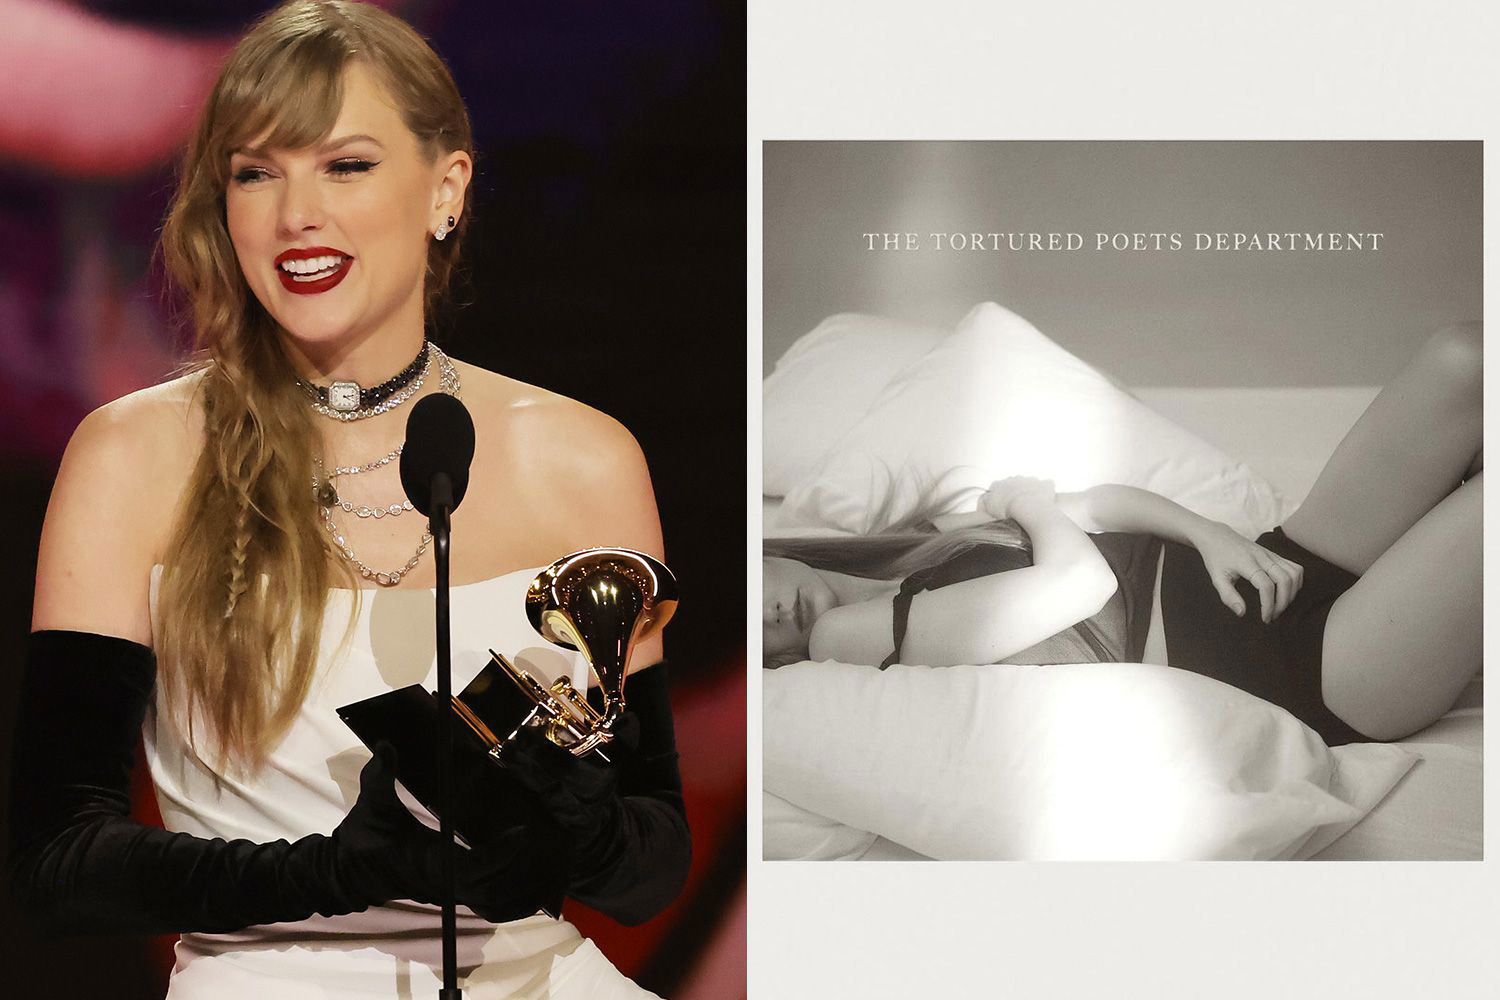 Taylor Swift Shares the Sexy Cover of New Album “The Tortured Poets ...